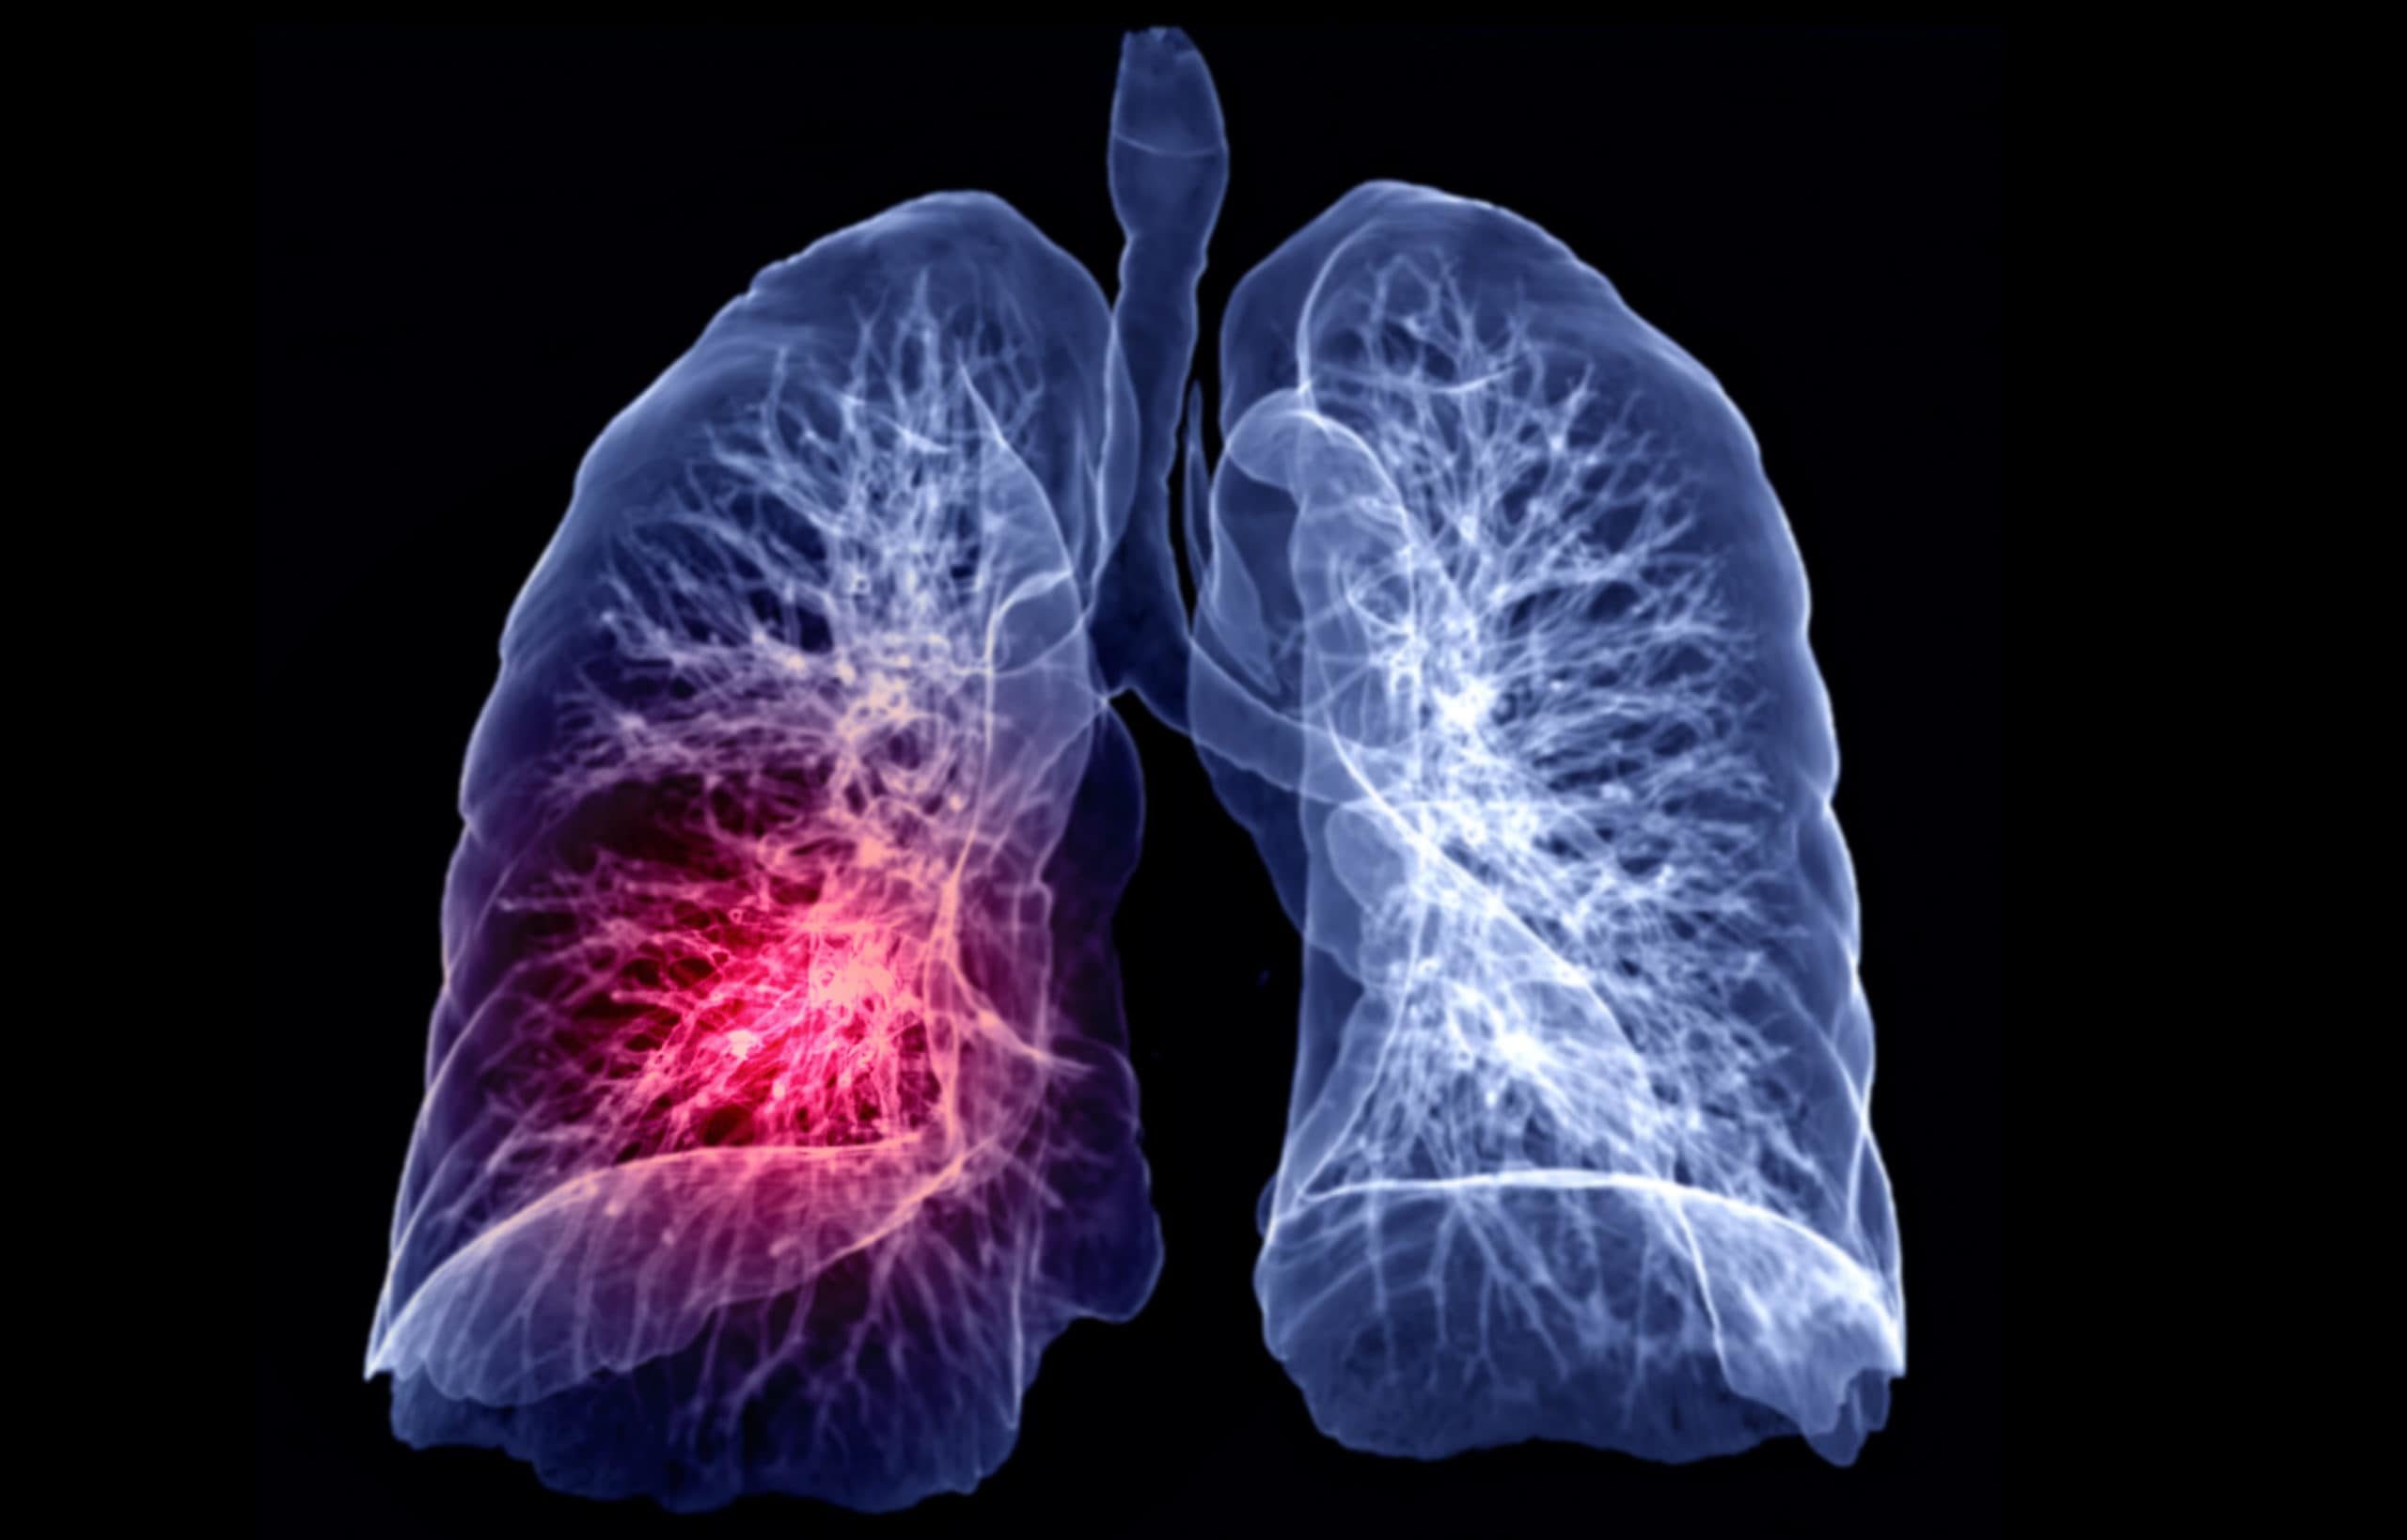 Is There Hope for CT Lung Screening?